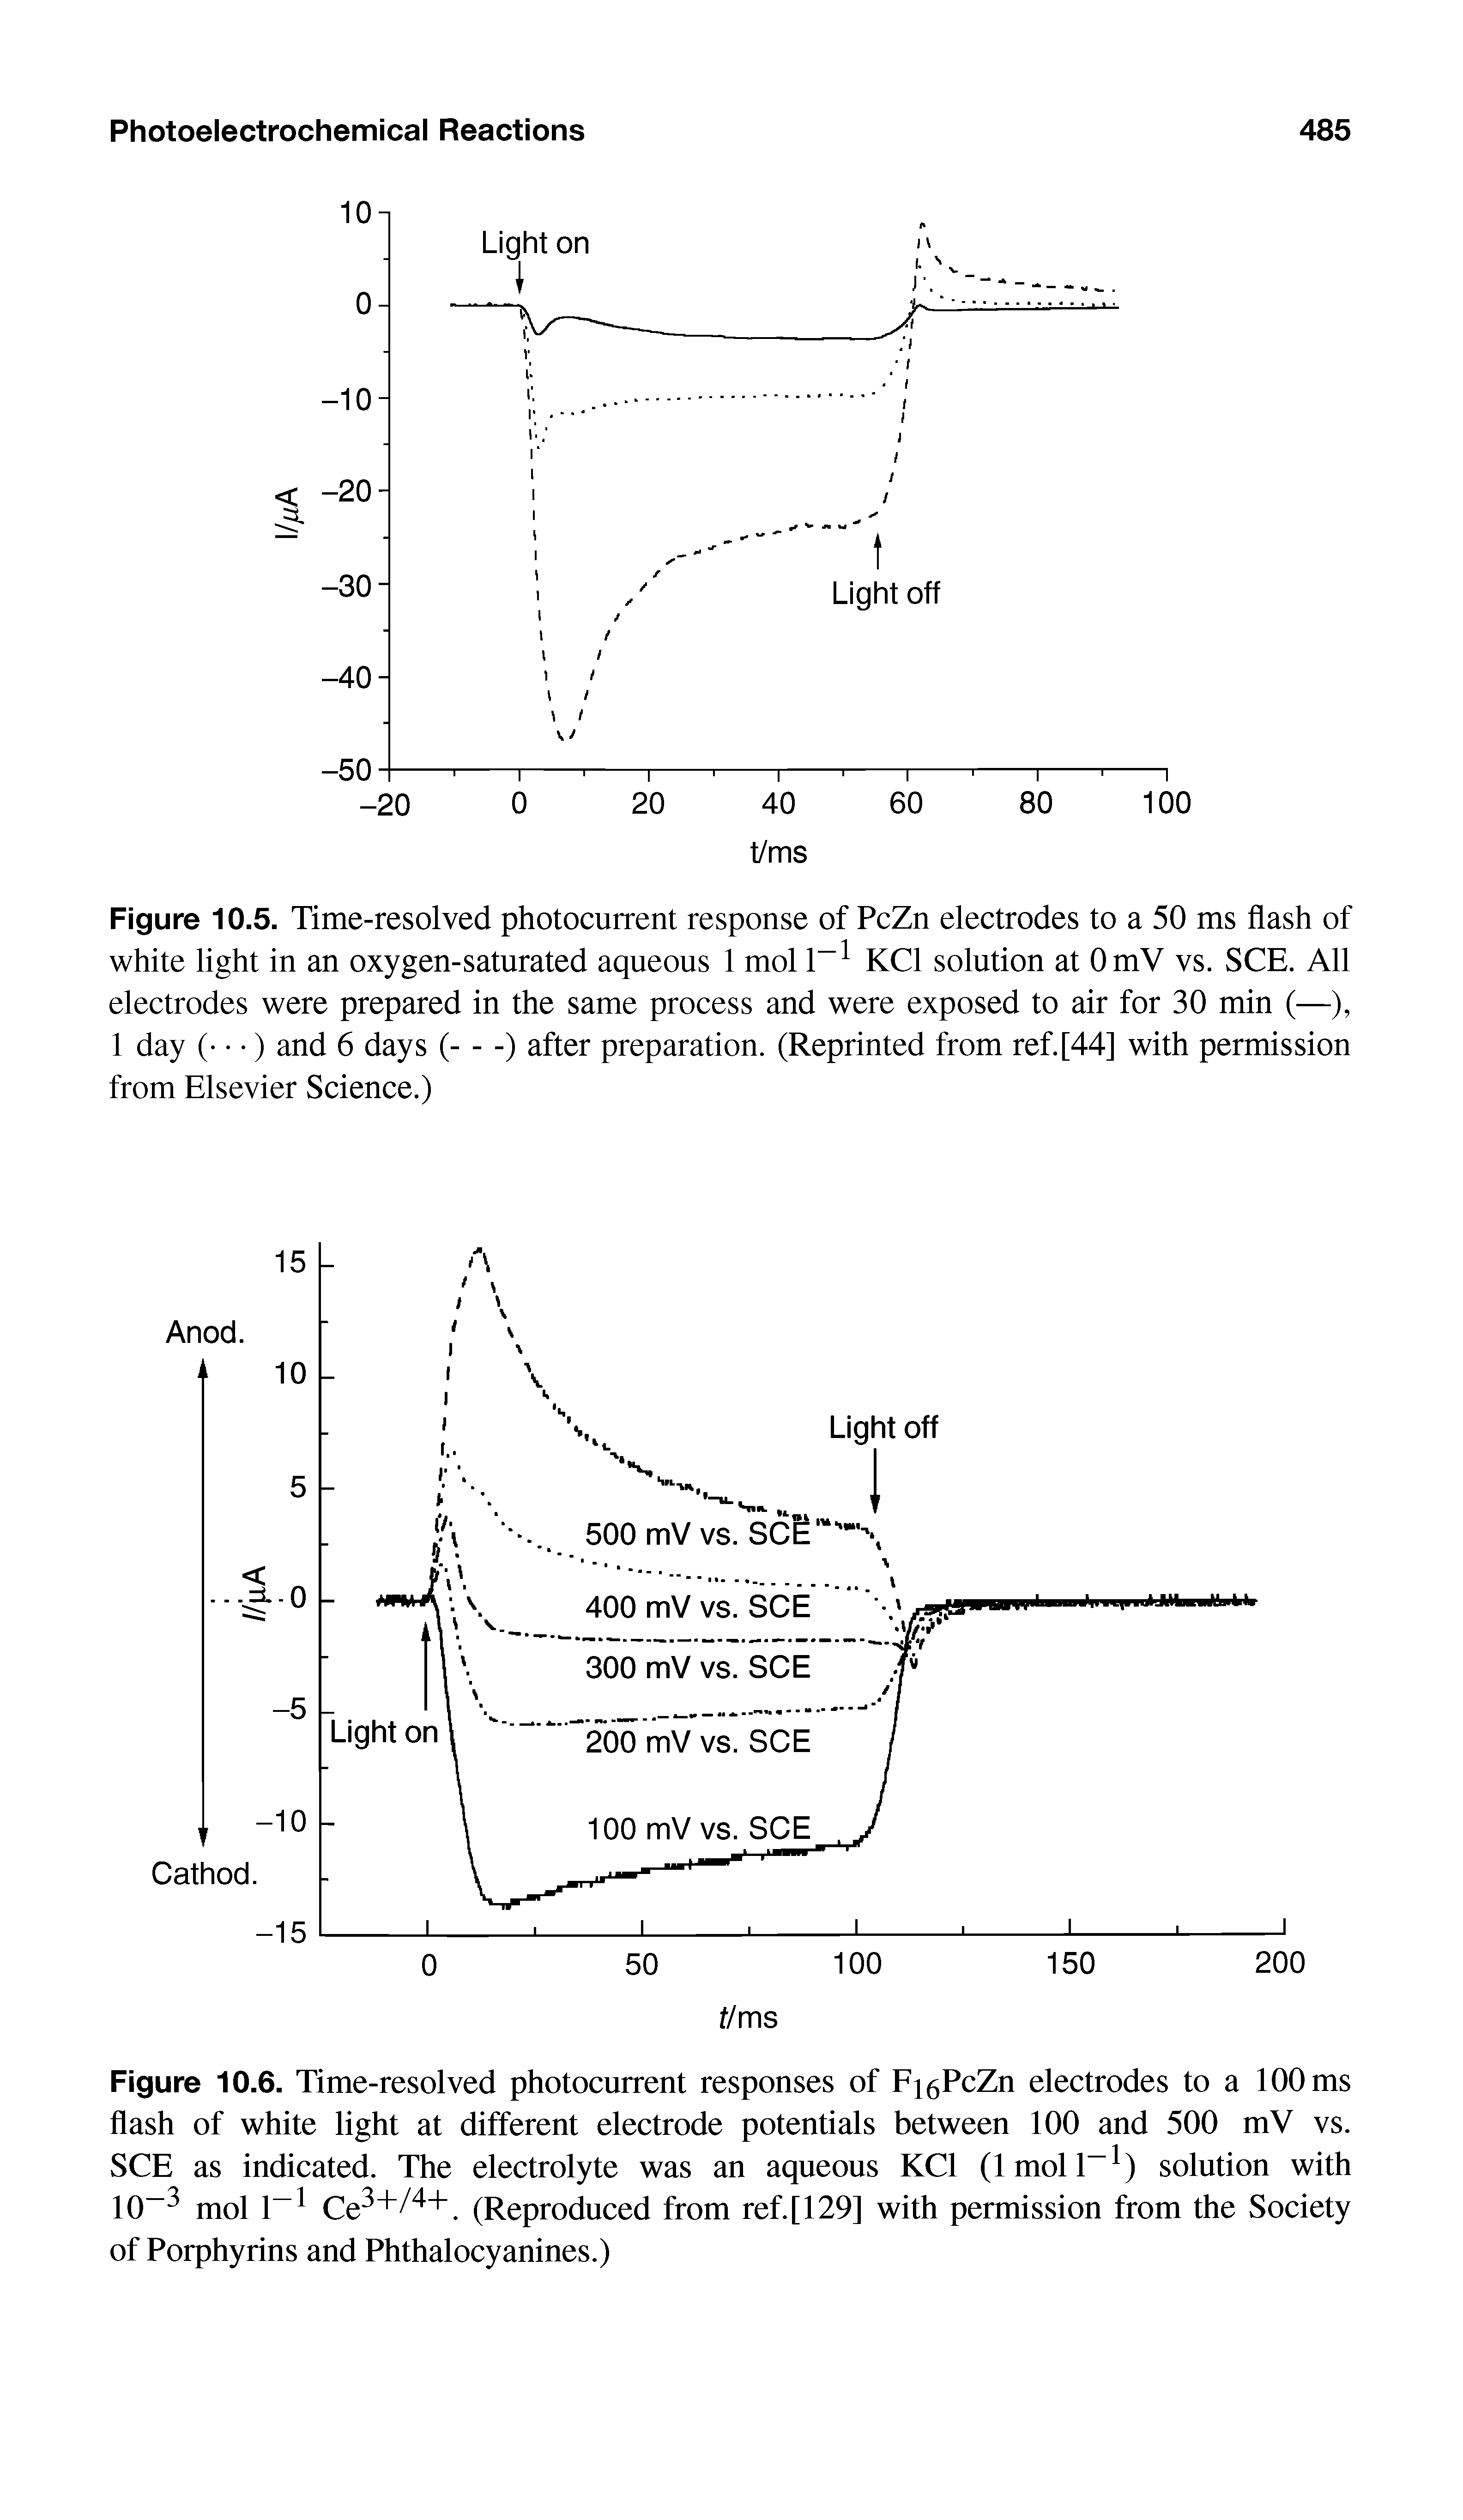 Figure 10.6. Time-resolved photocurrent responses of Fi6PcZn electrodes to a 100 ms flash of white light at different electrode potentials between 100 and 500 mV vs. SCE as indicated. The electrolyte was an aqueous KCl (lmoll ) solution with 10 mol 1 Ce +Z. (Reproduced from ref. [129] with permission from the Society of Porphyrins and Phthalocyanines.)...